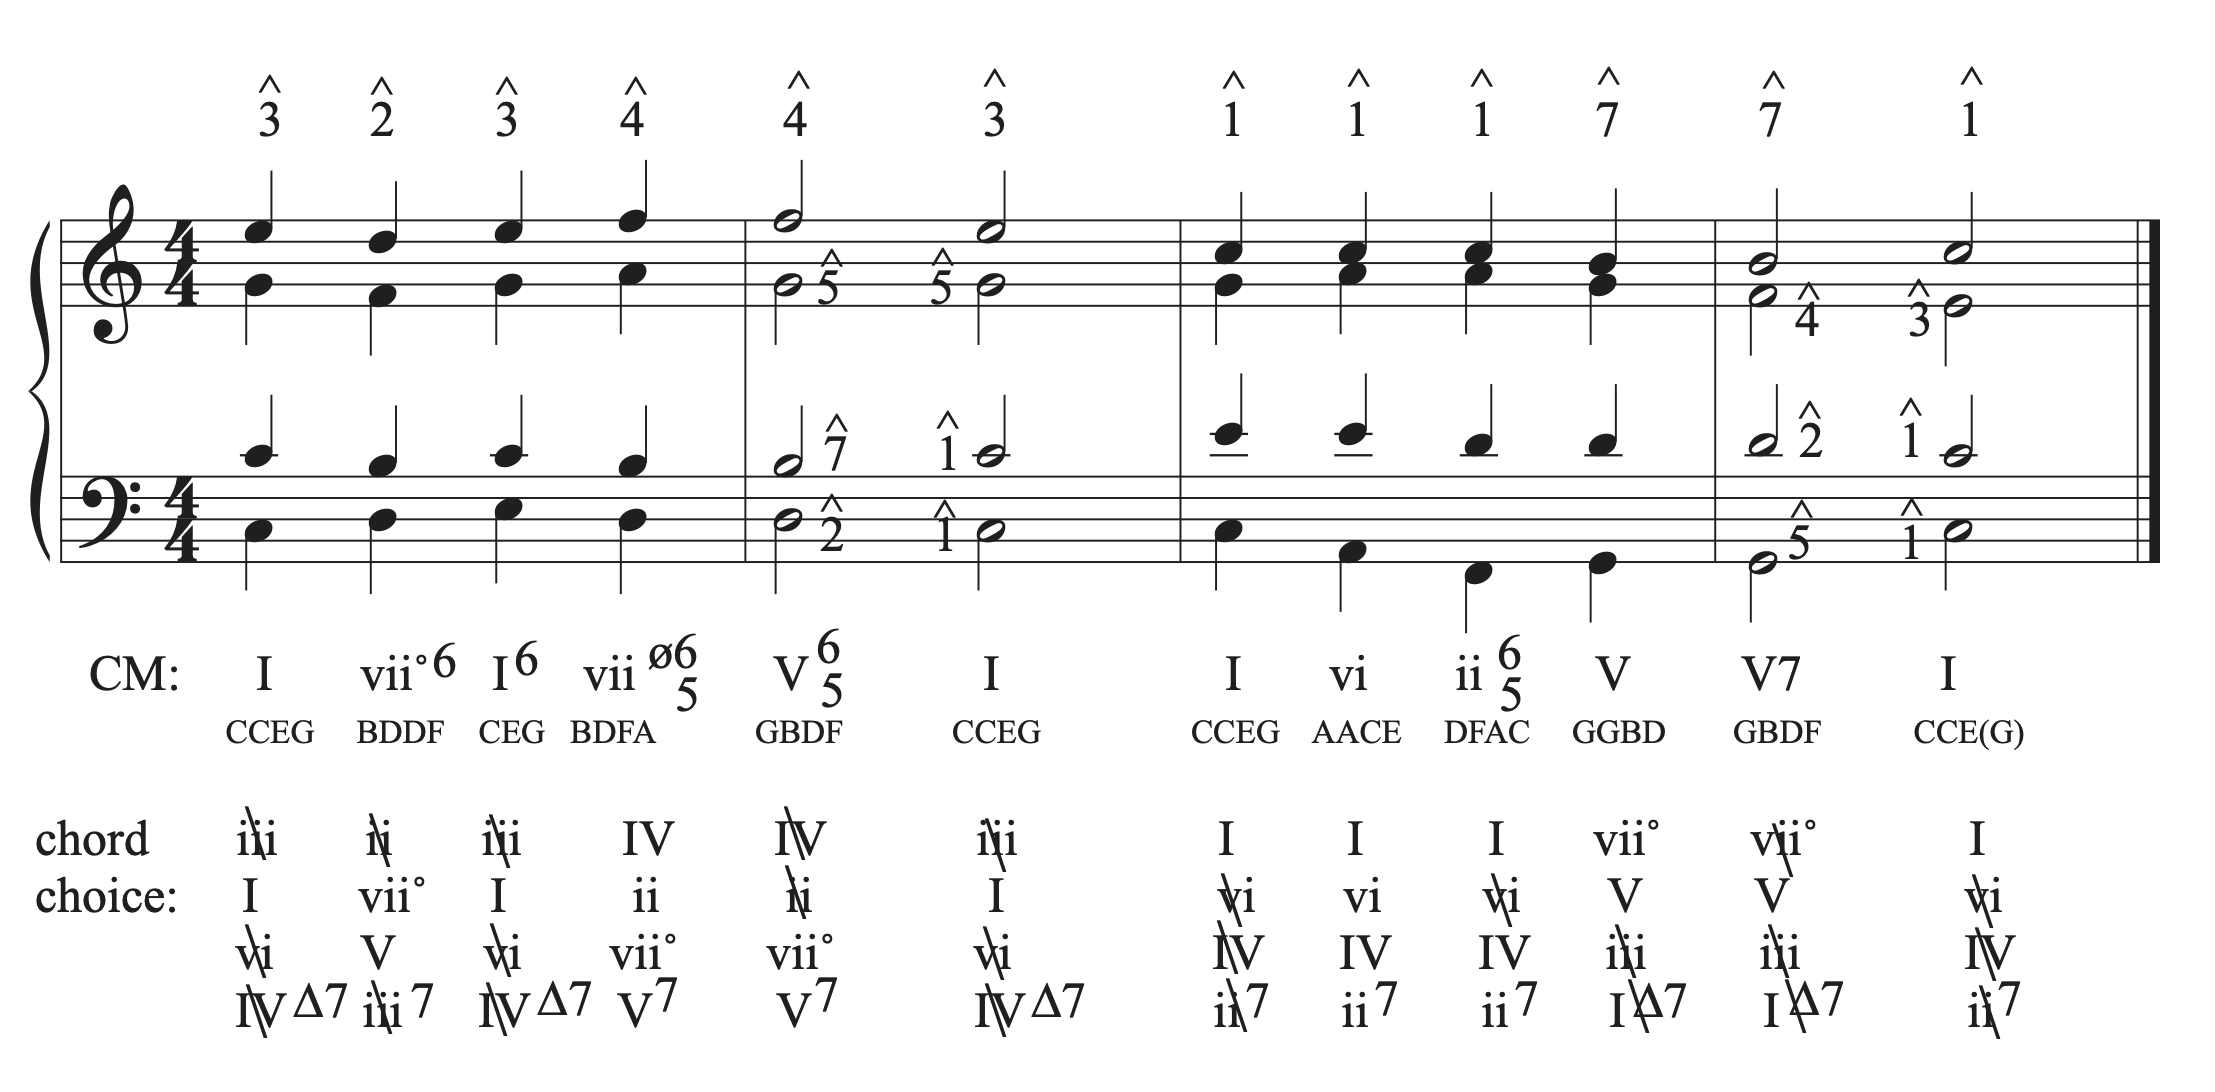 The musical example in C with the alto and tenor added to bar 4.